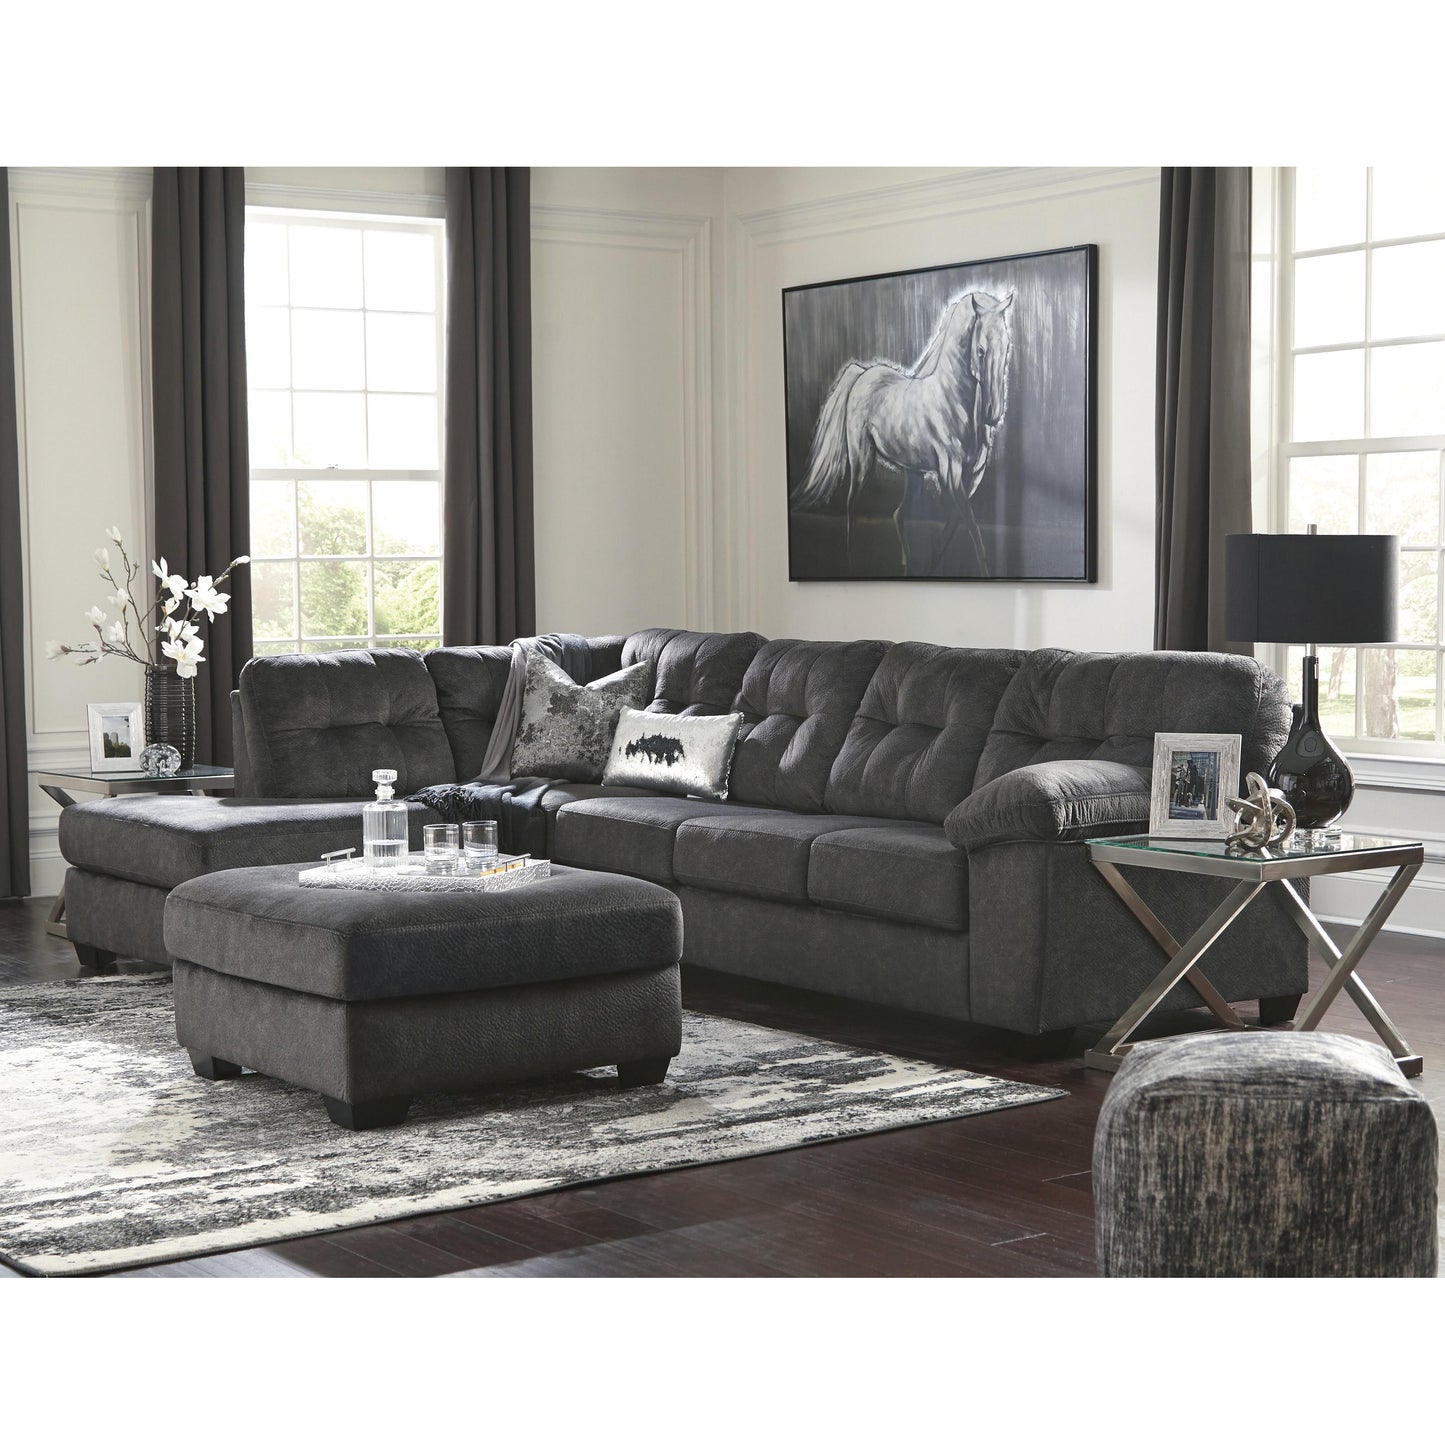 Signature Design by Ashley Accrington Fabric 2 pc Sectional 7050916/7050967